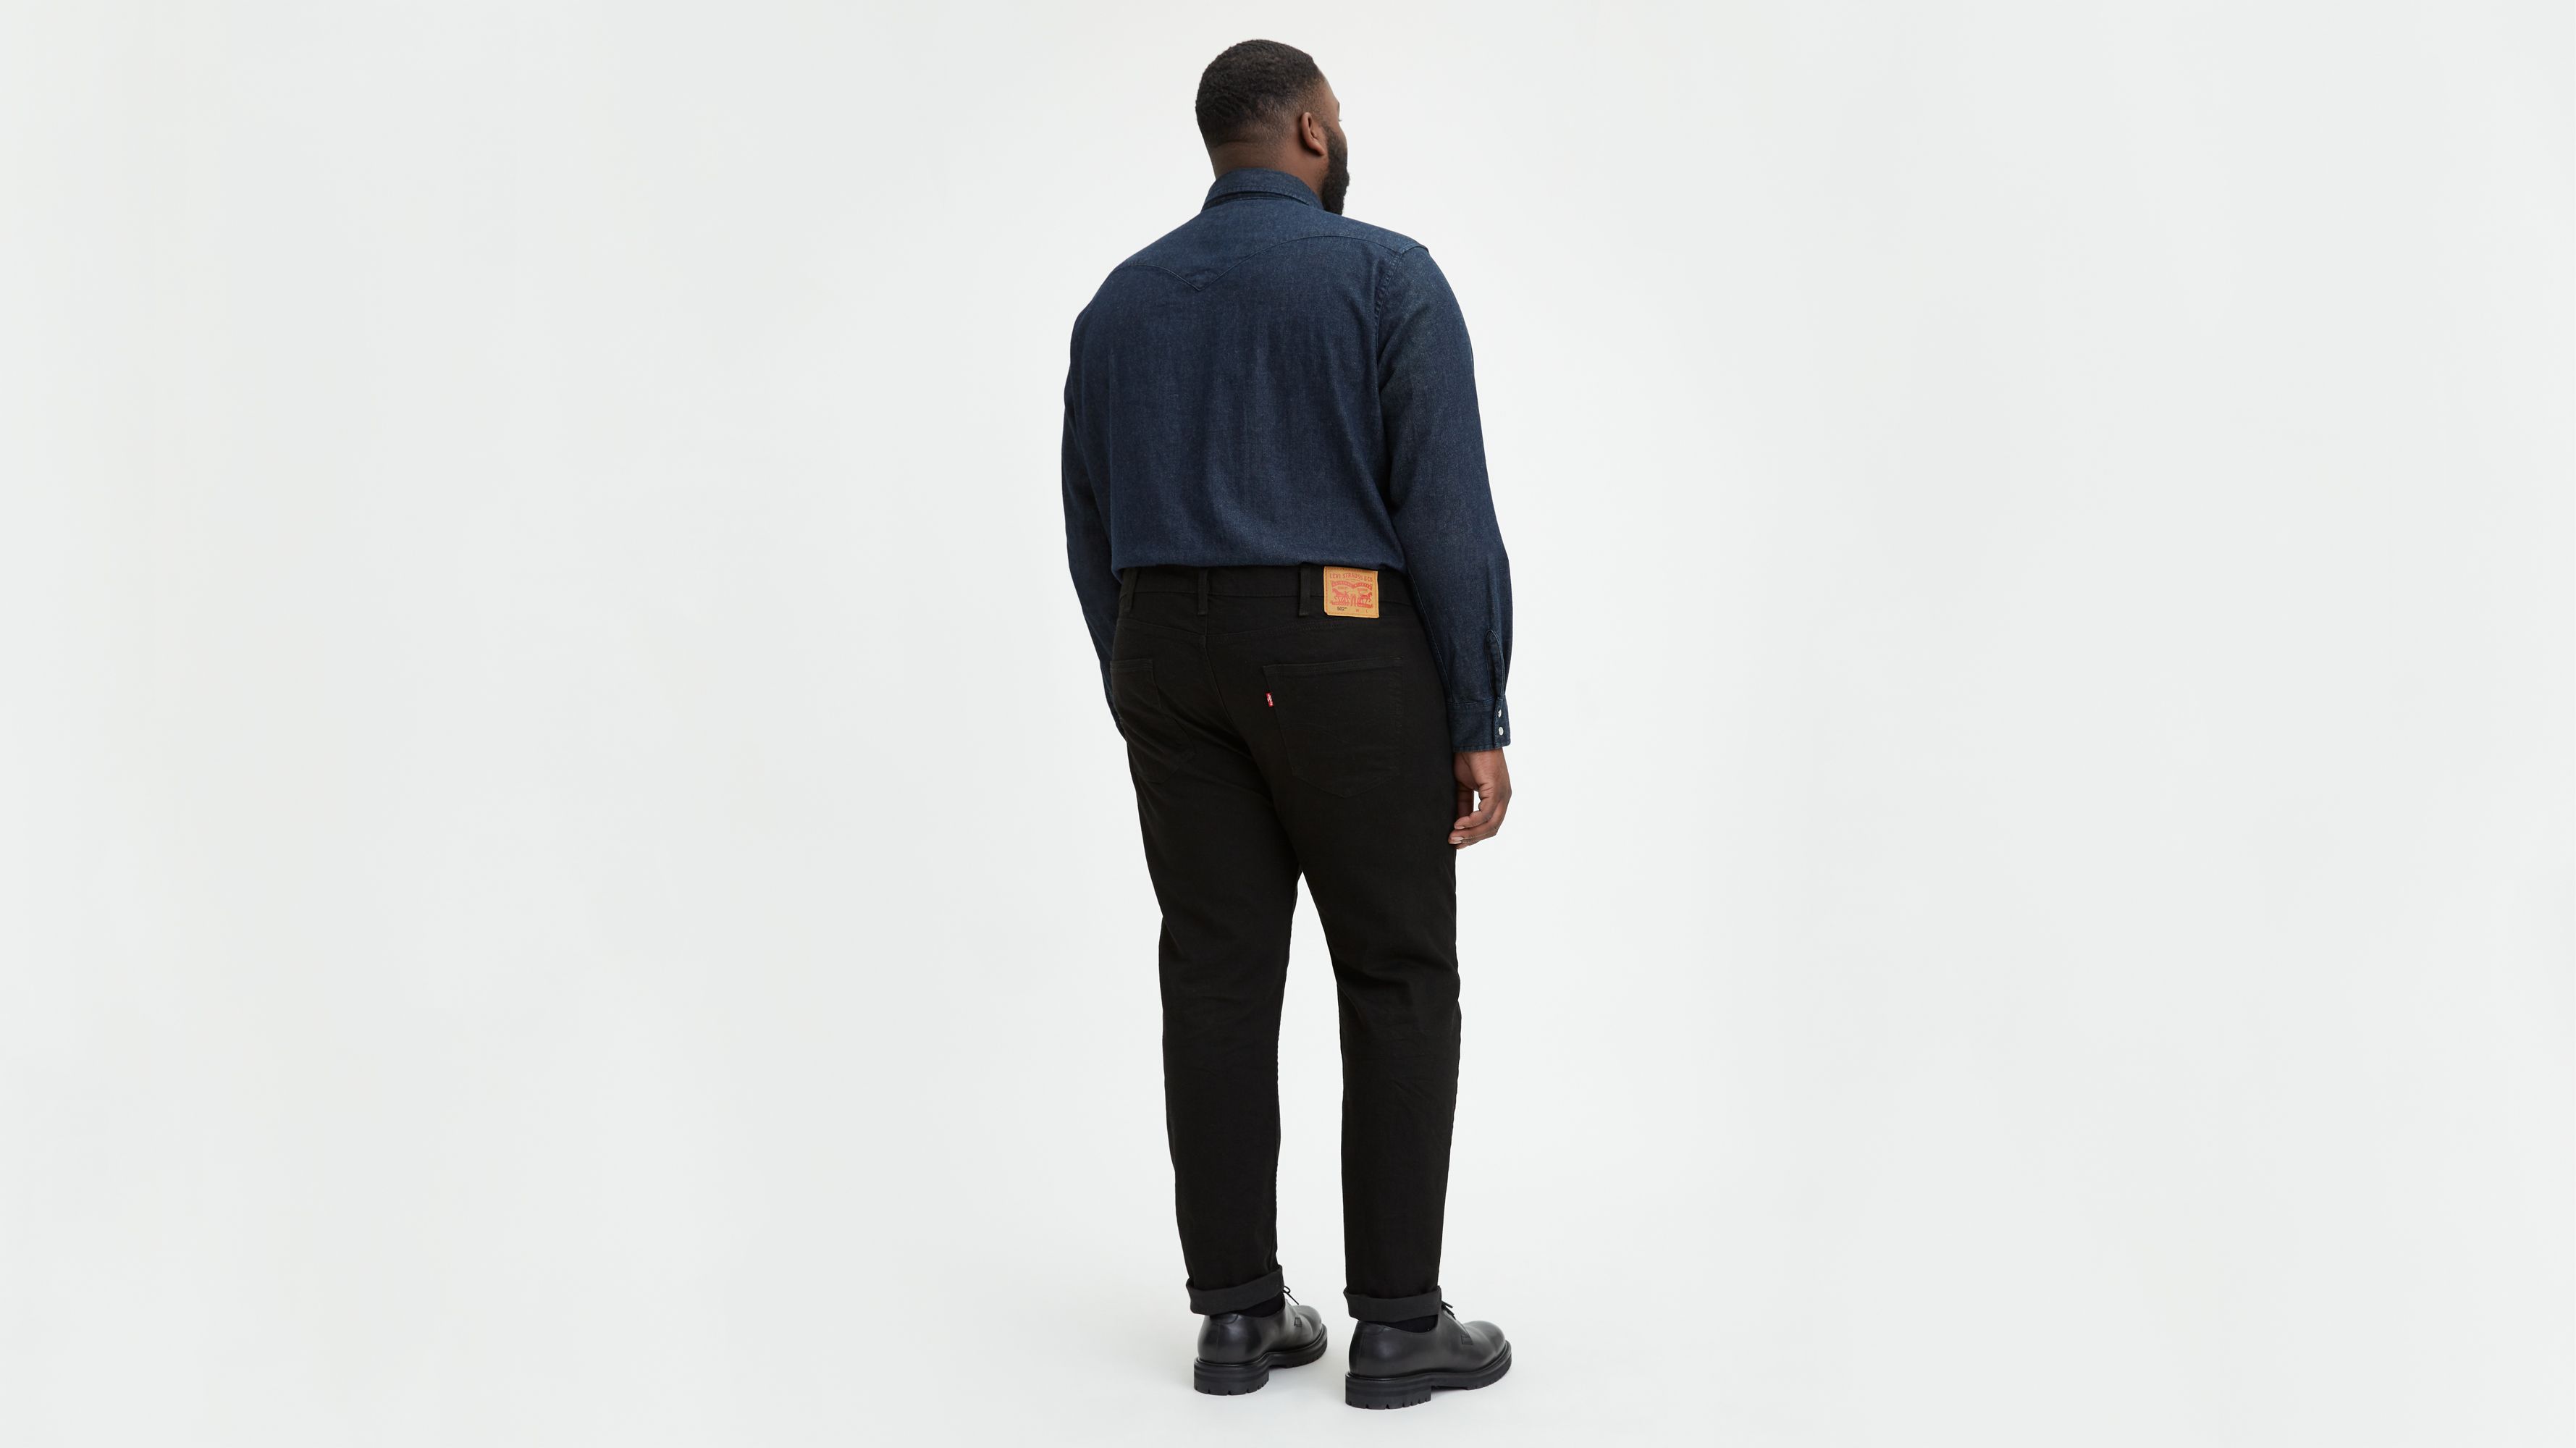 levis tall mens jeans